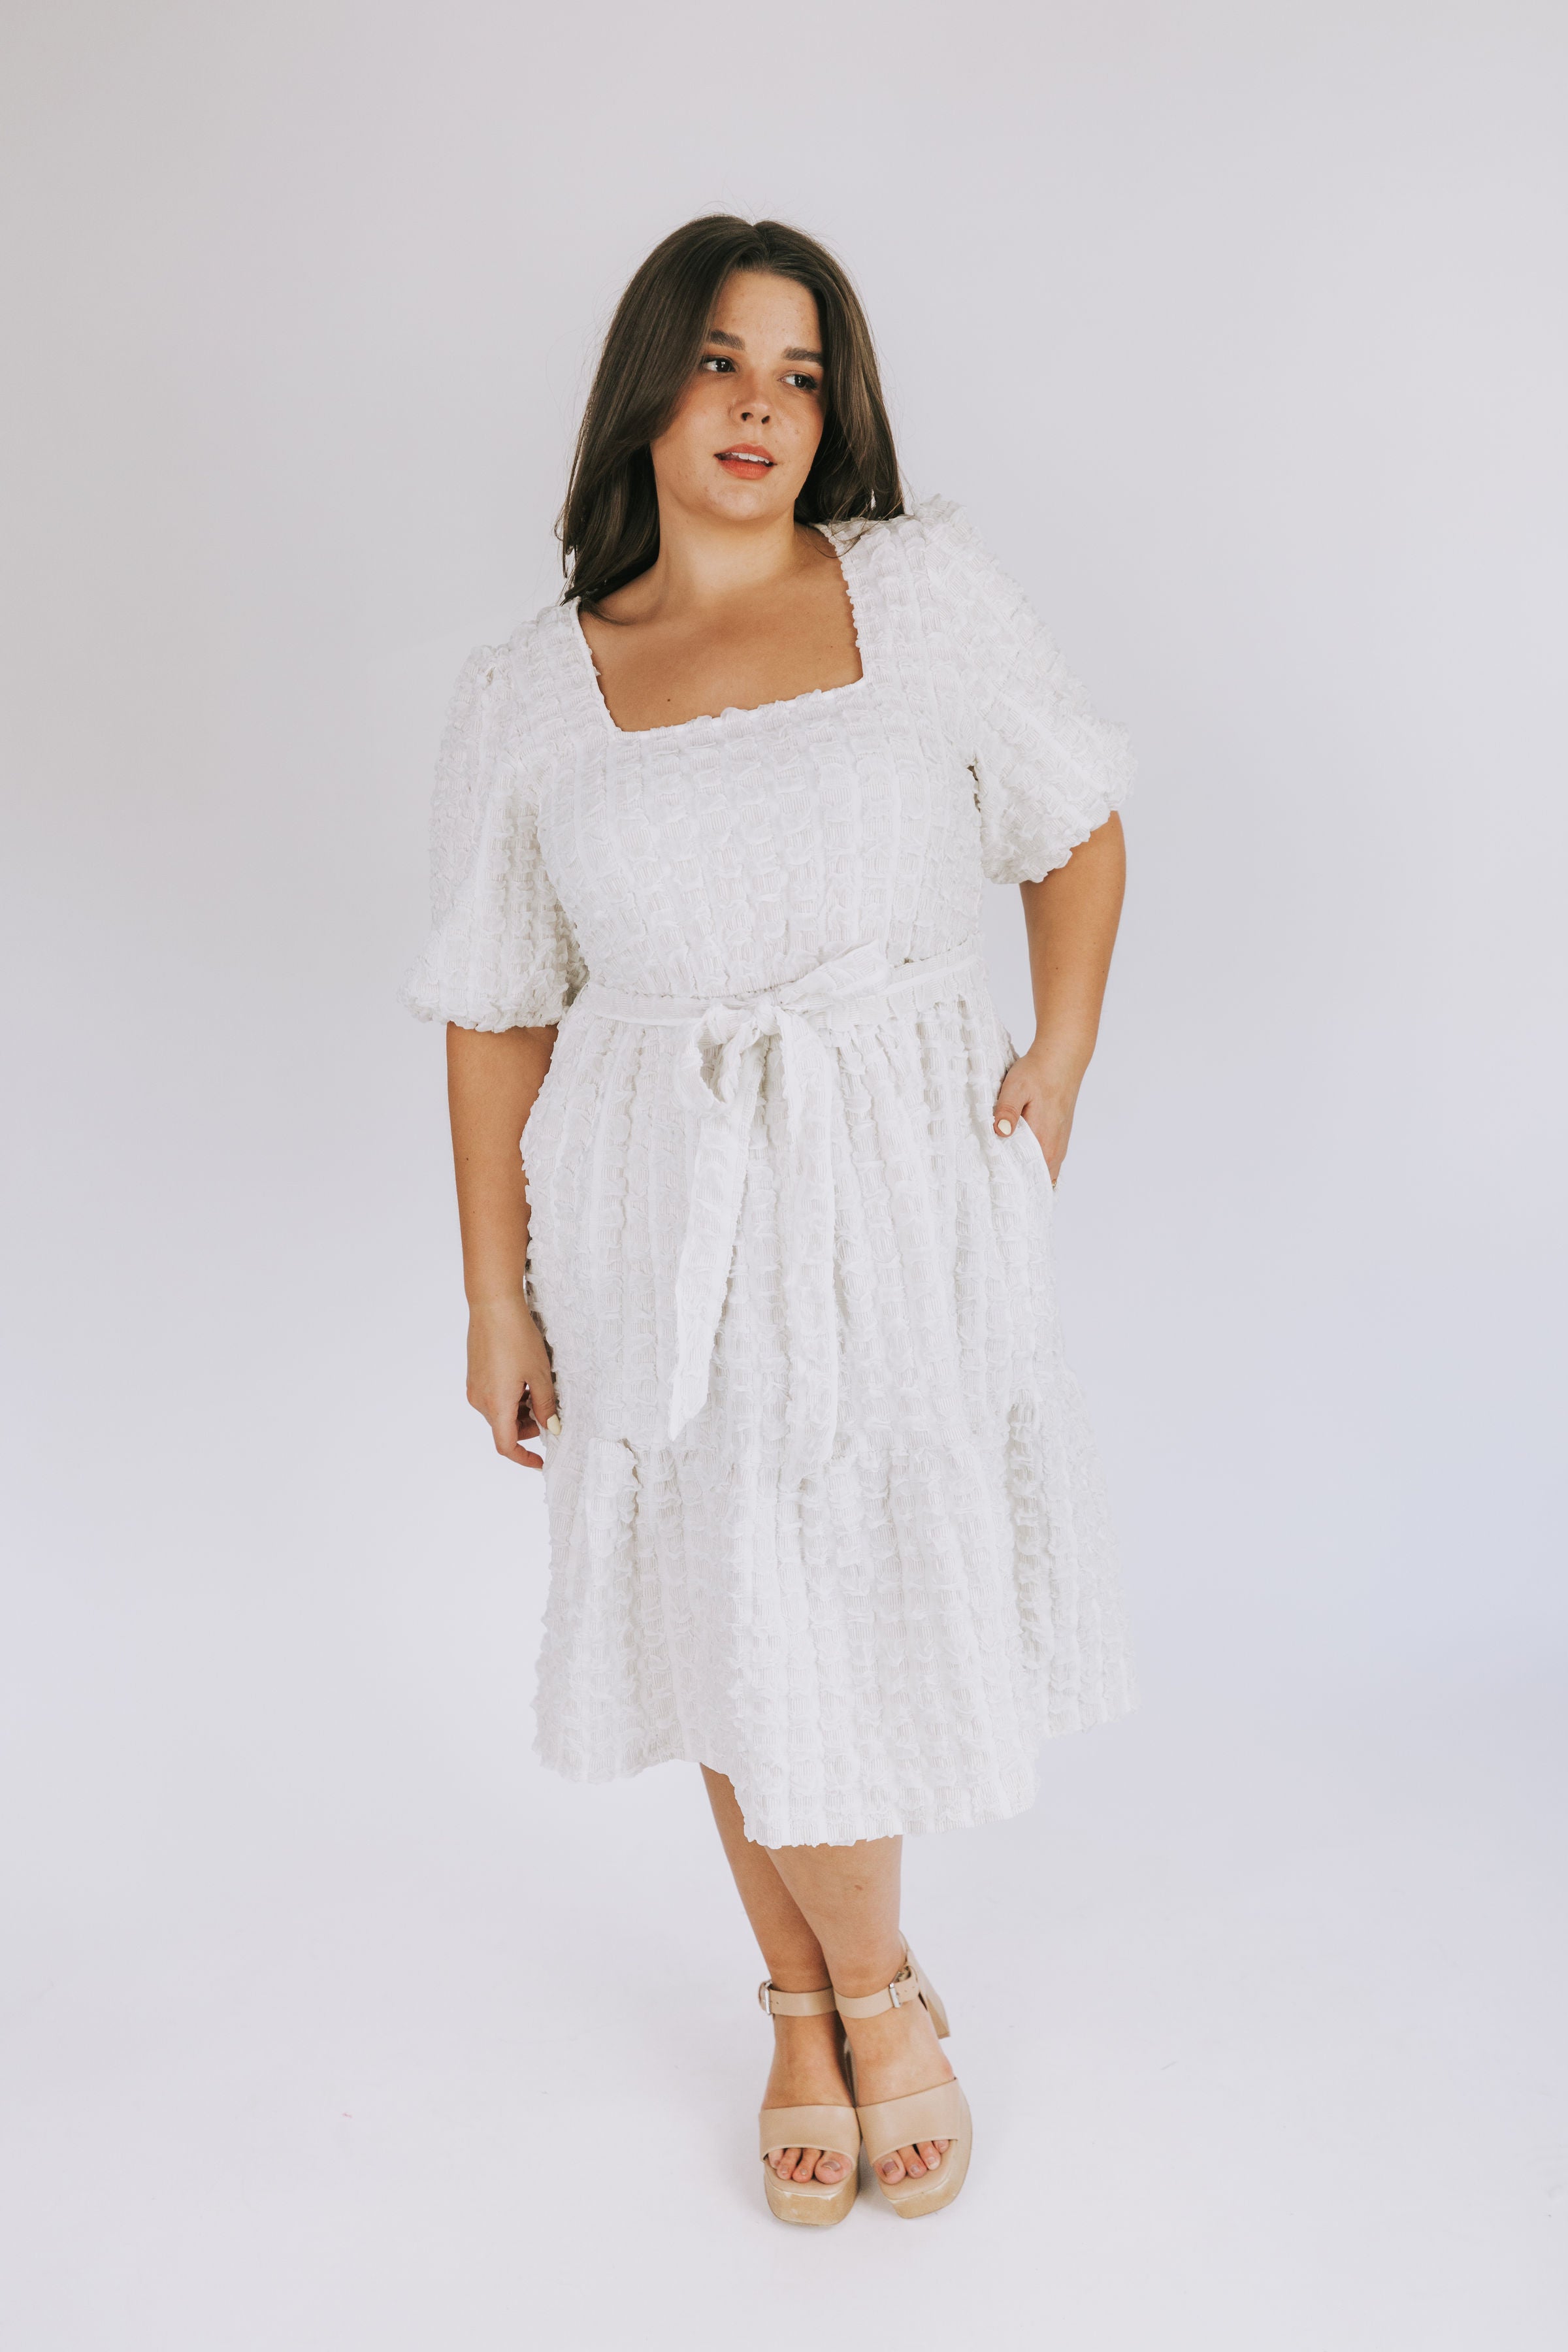 PLUS SIZE - Go Your Own Way Dress